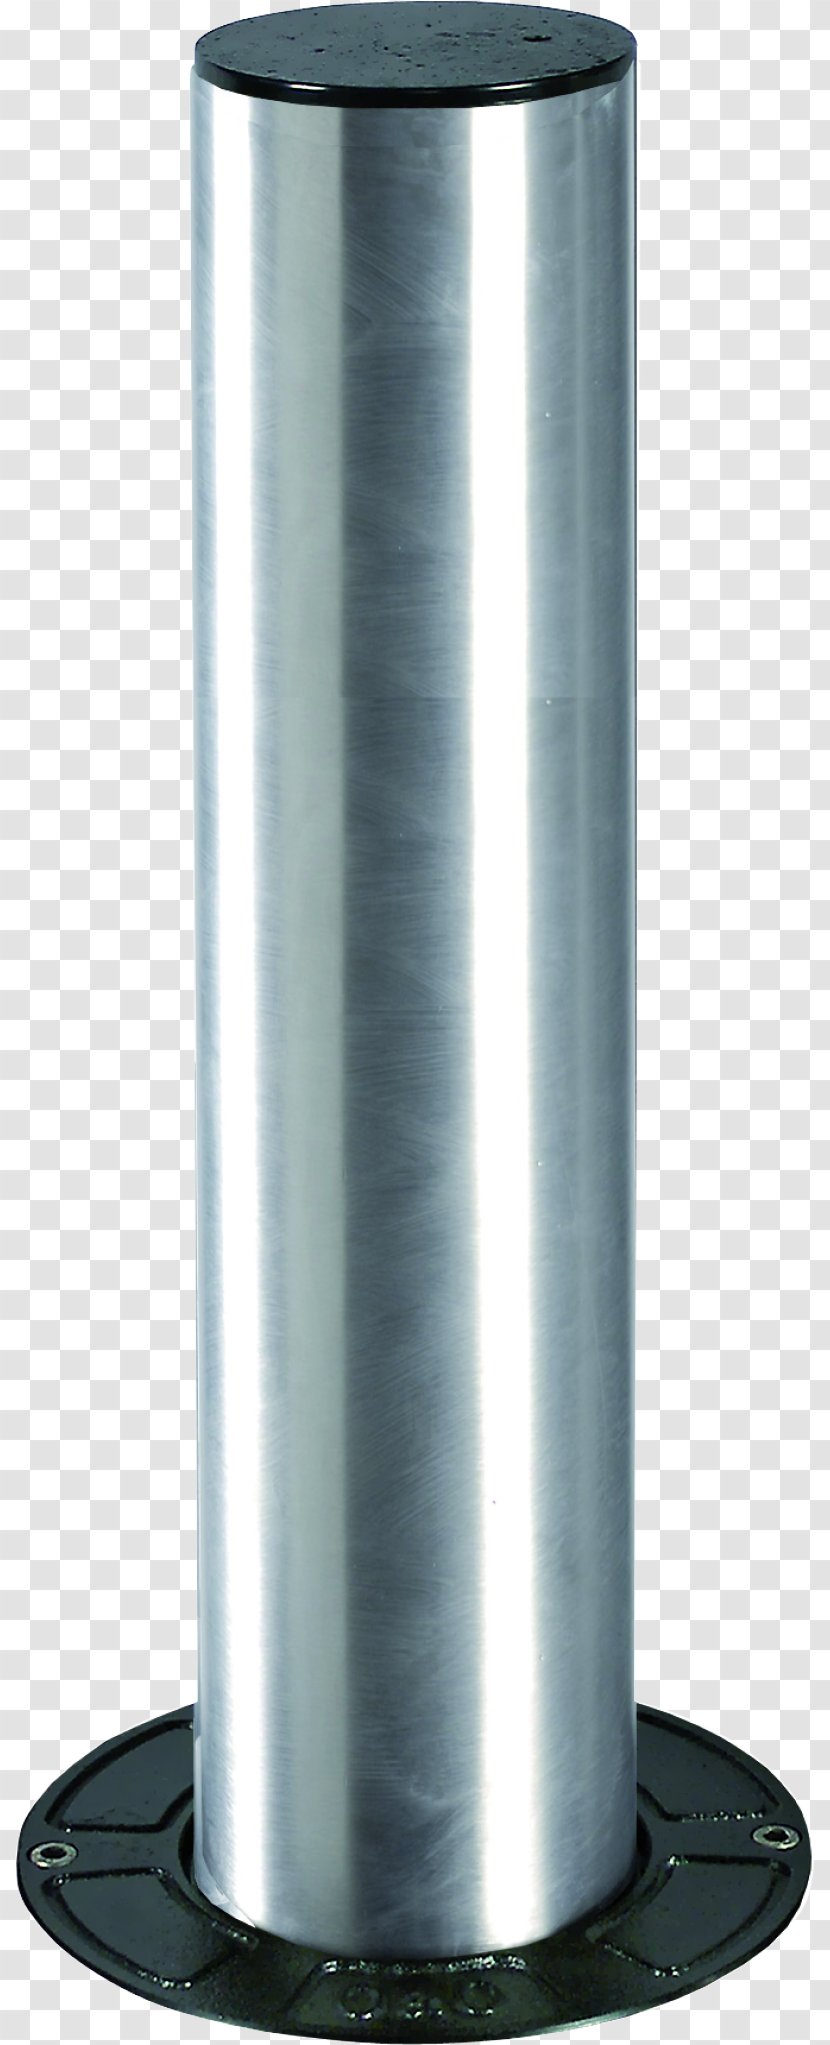 Bollard Stainless Steel Computer Hardware Product Manuals - Aesthetics - Scudo Transparent PNG